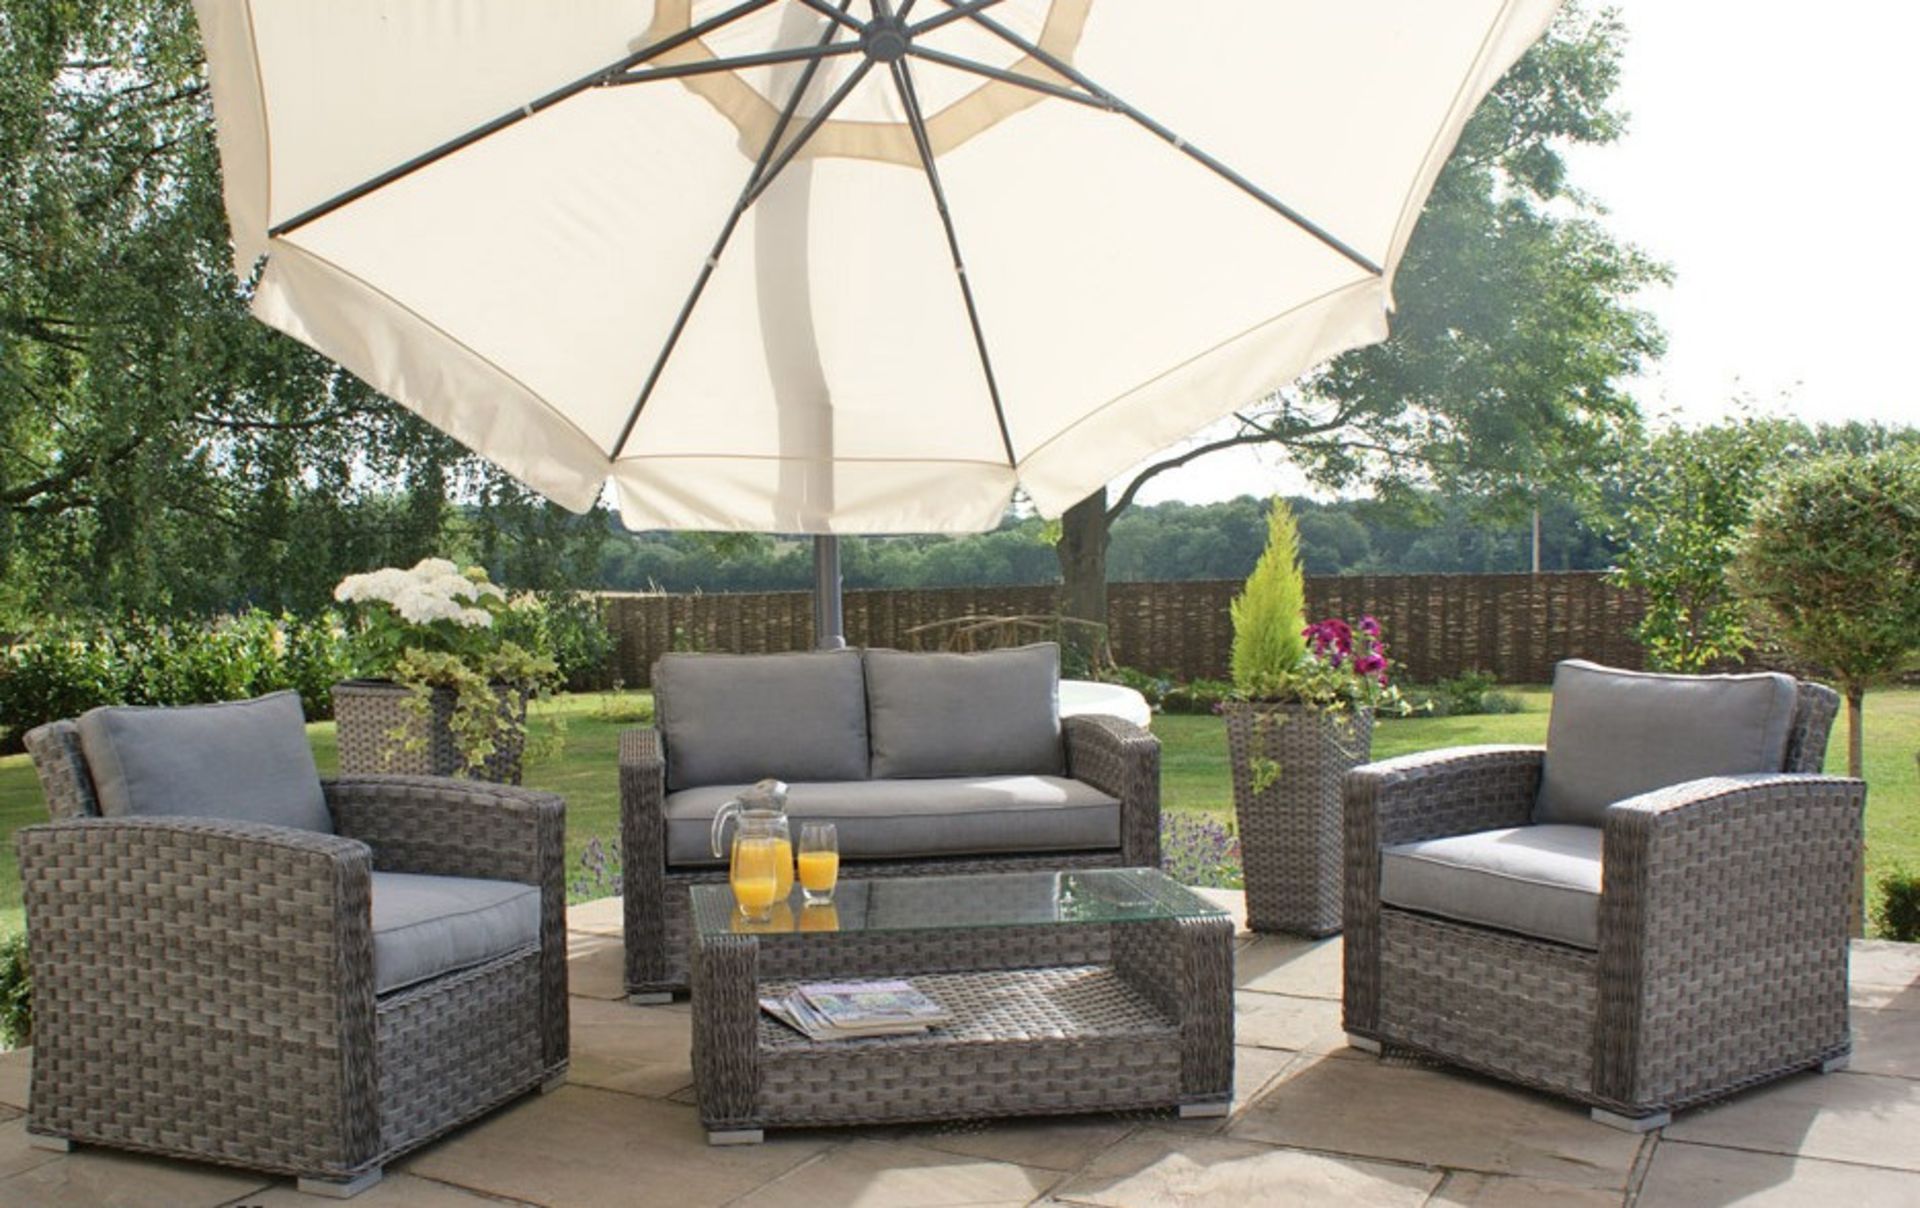 + VAT Brand New Chelsea Garden Company Four Piece Grey Rattan Outdoor Sofa Set - Includes Two